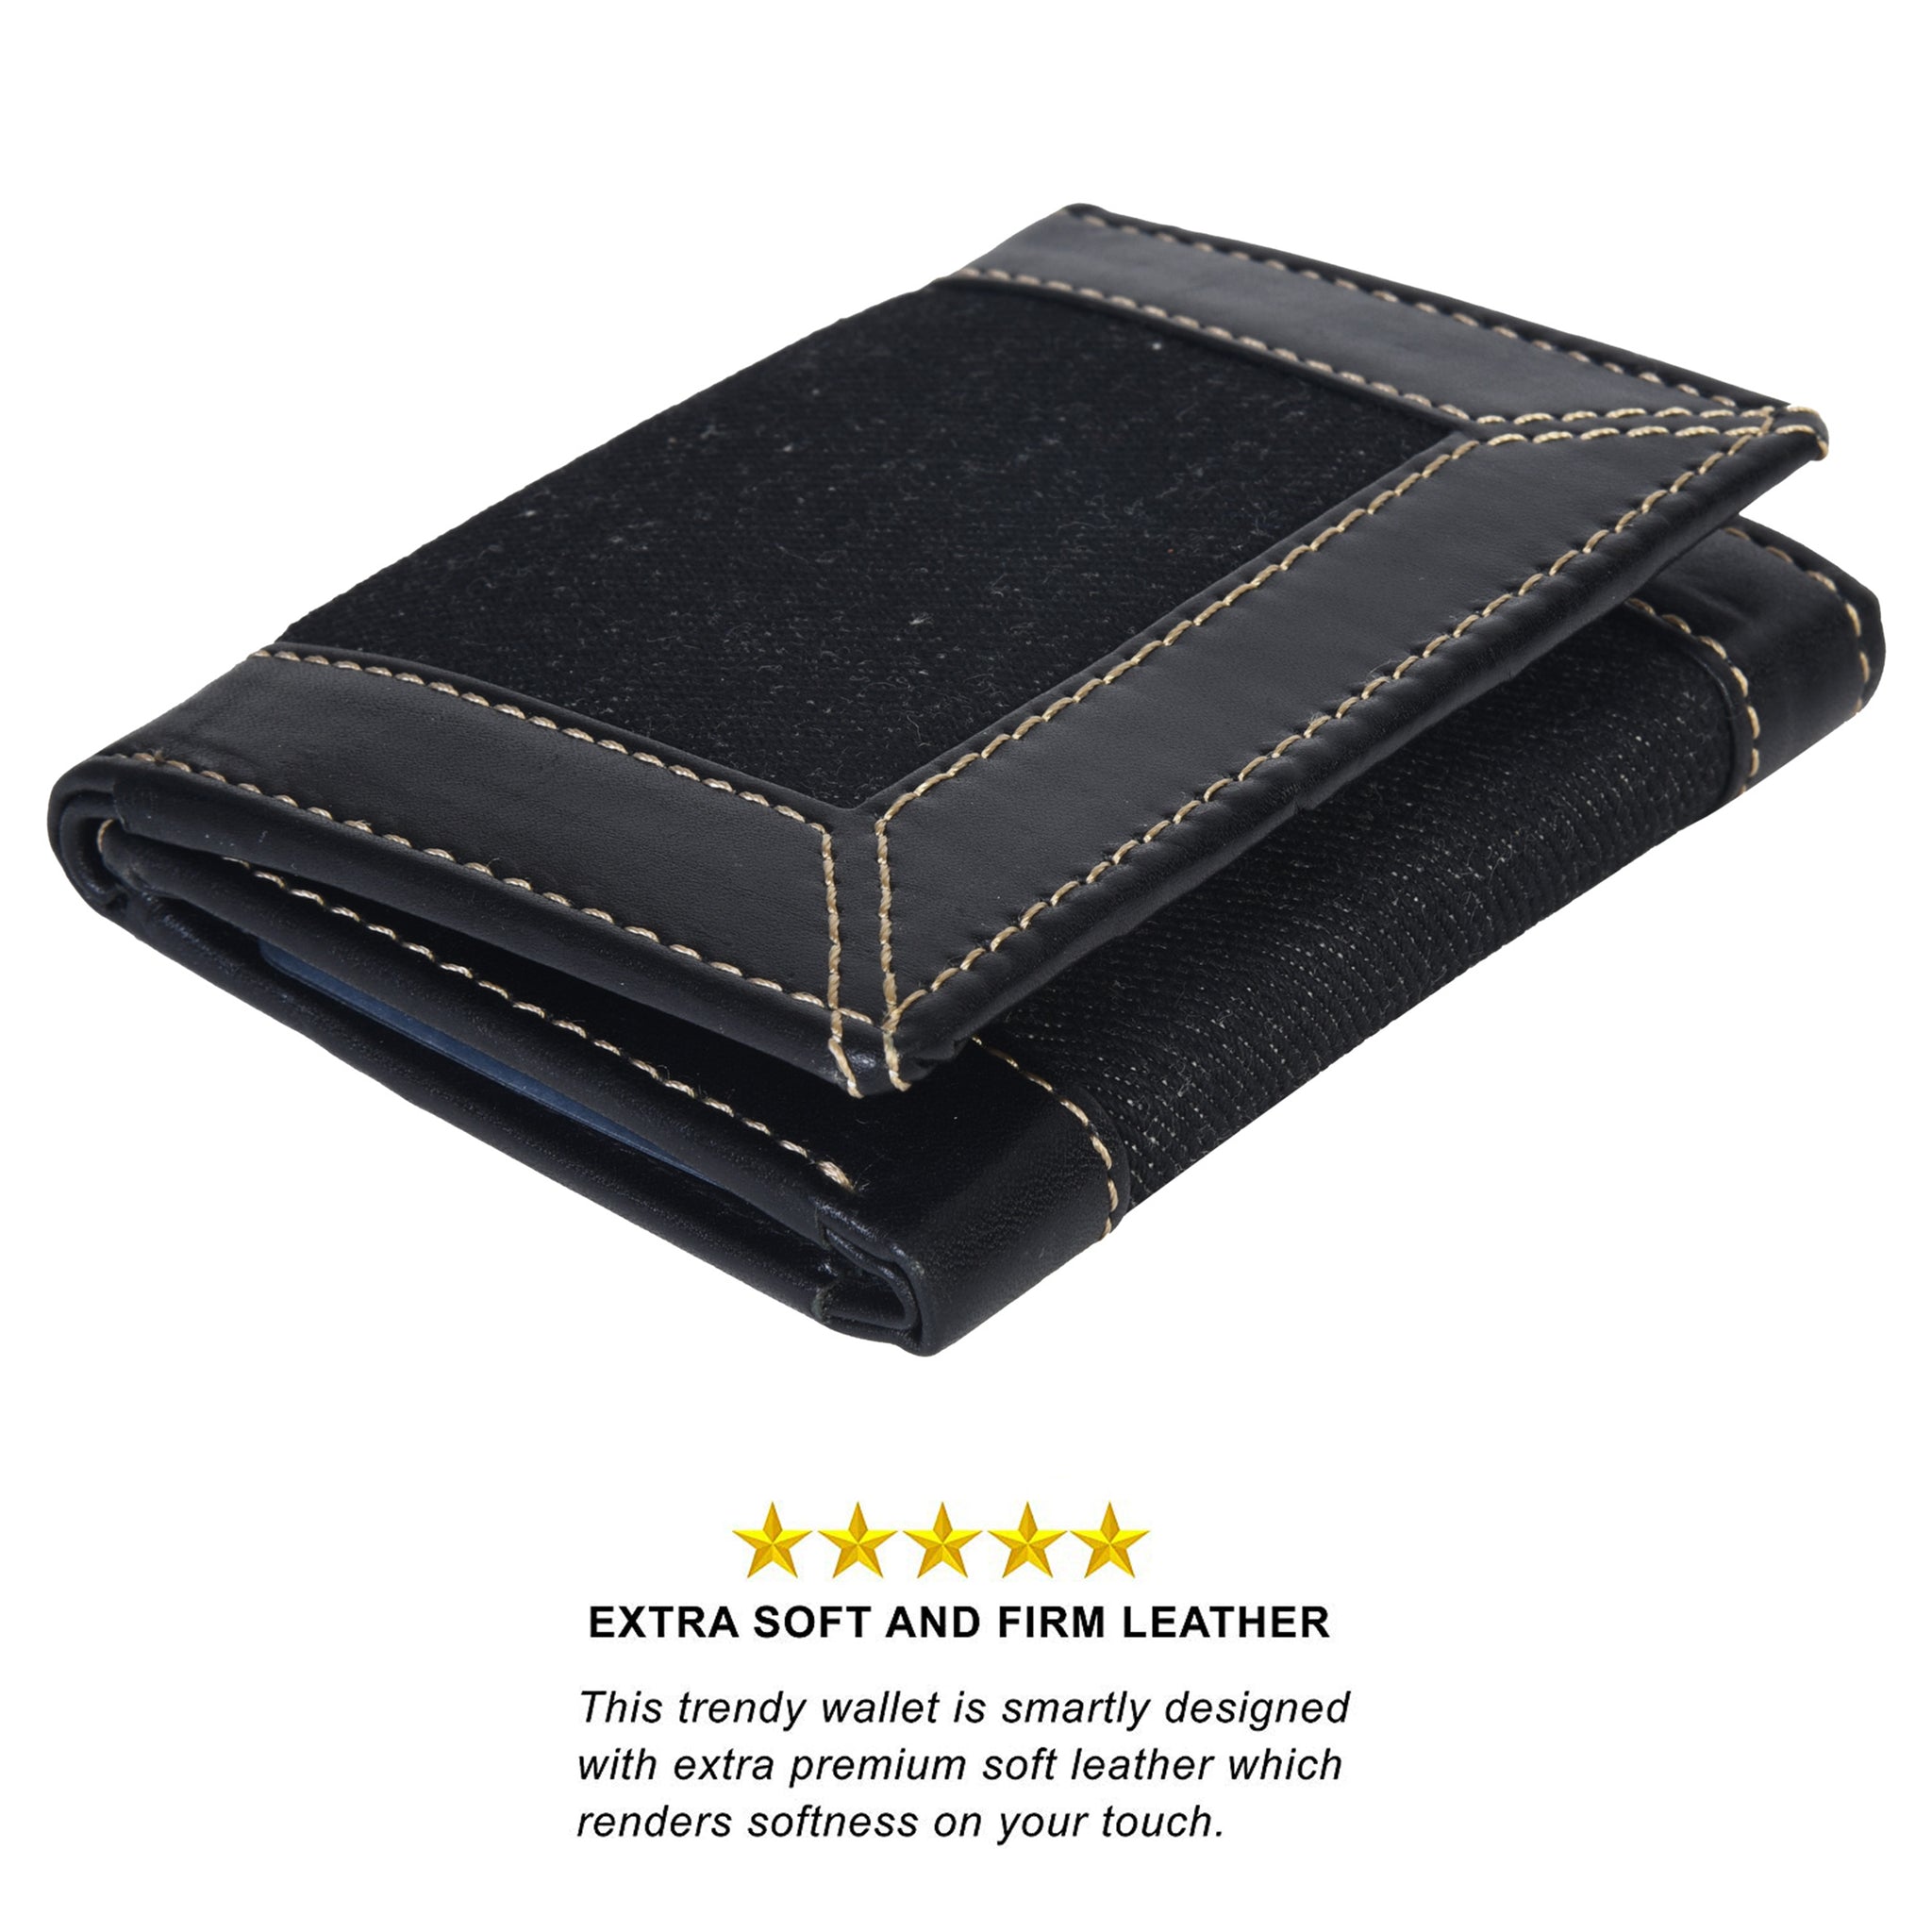 Leatherboss Genuine Leather Jeans Designer Trifold Wallet with Gift Bag, Black